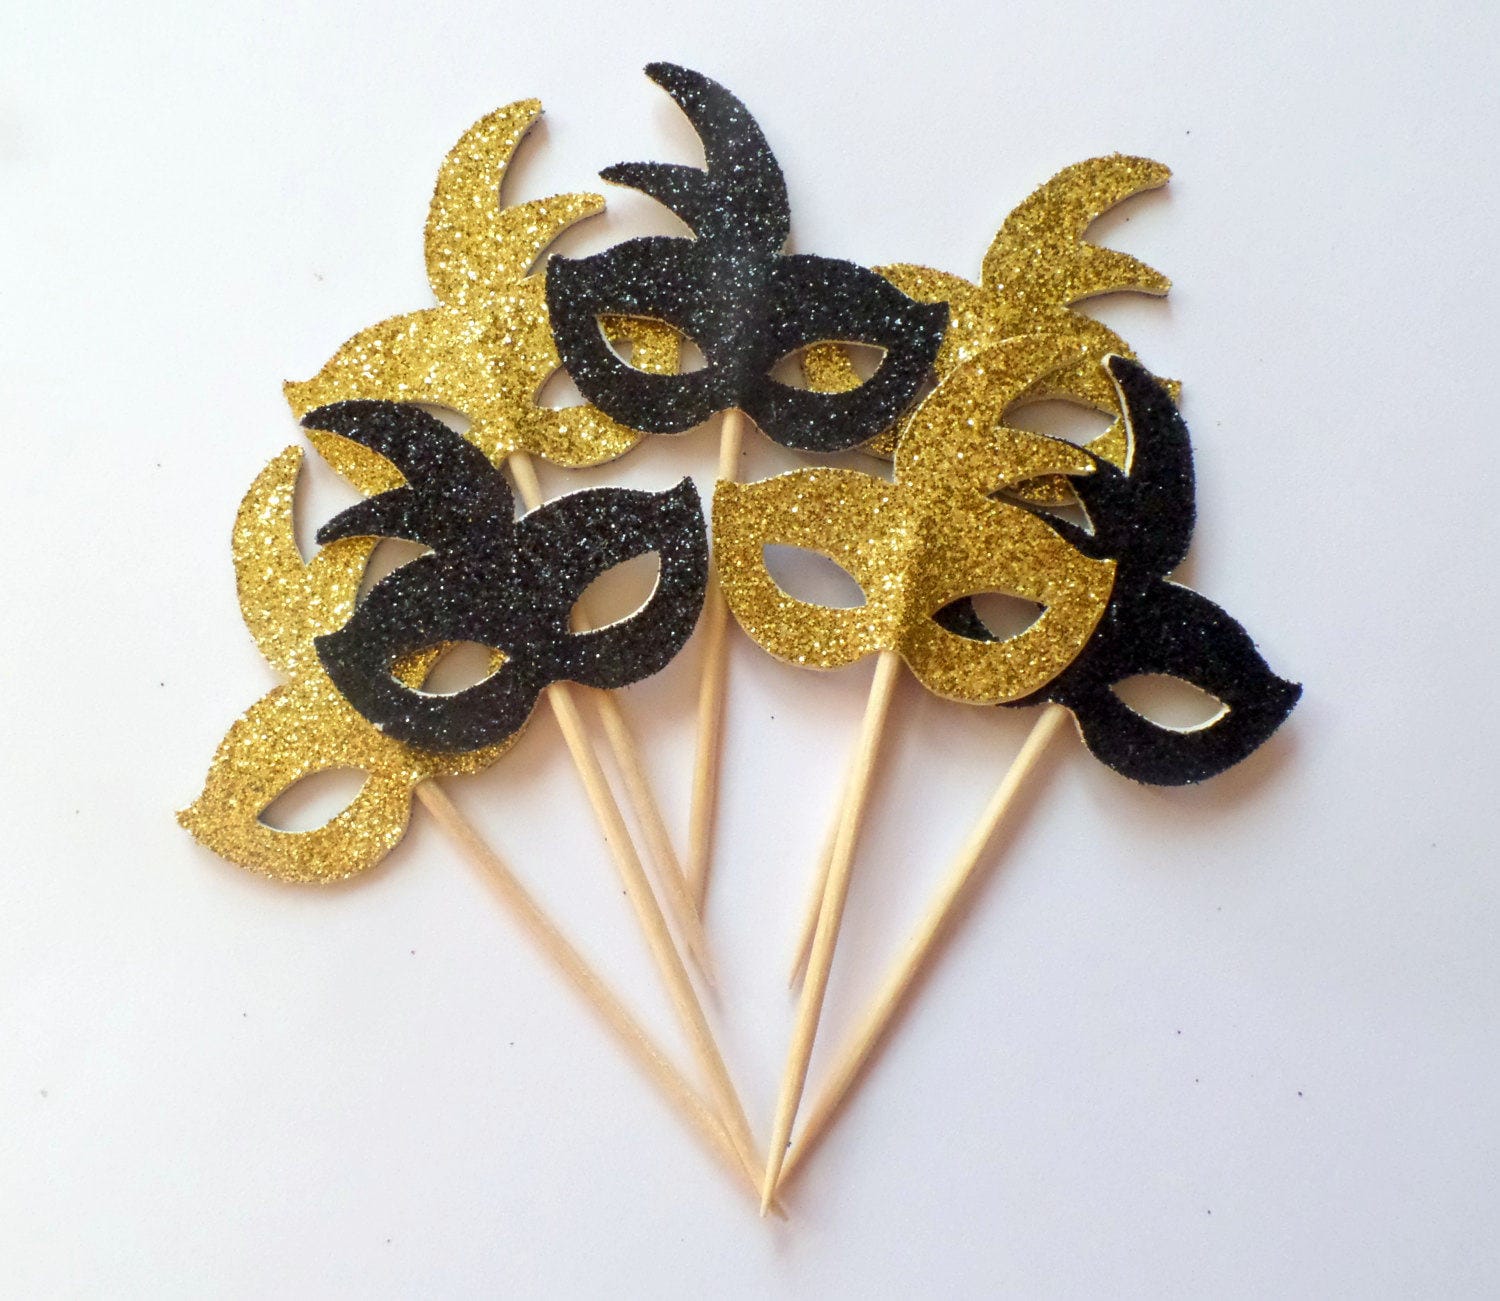 Mardi Gras Cupcake Party Supplies Mardi Gras Cupcake Wrappers Set of 12 Masquerade Party Cupcake Decorations Dessert Wrappers